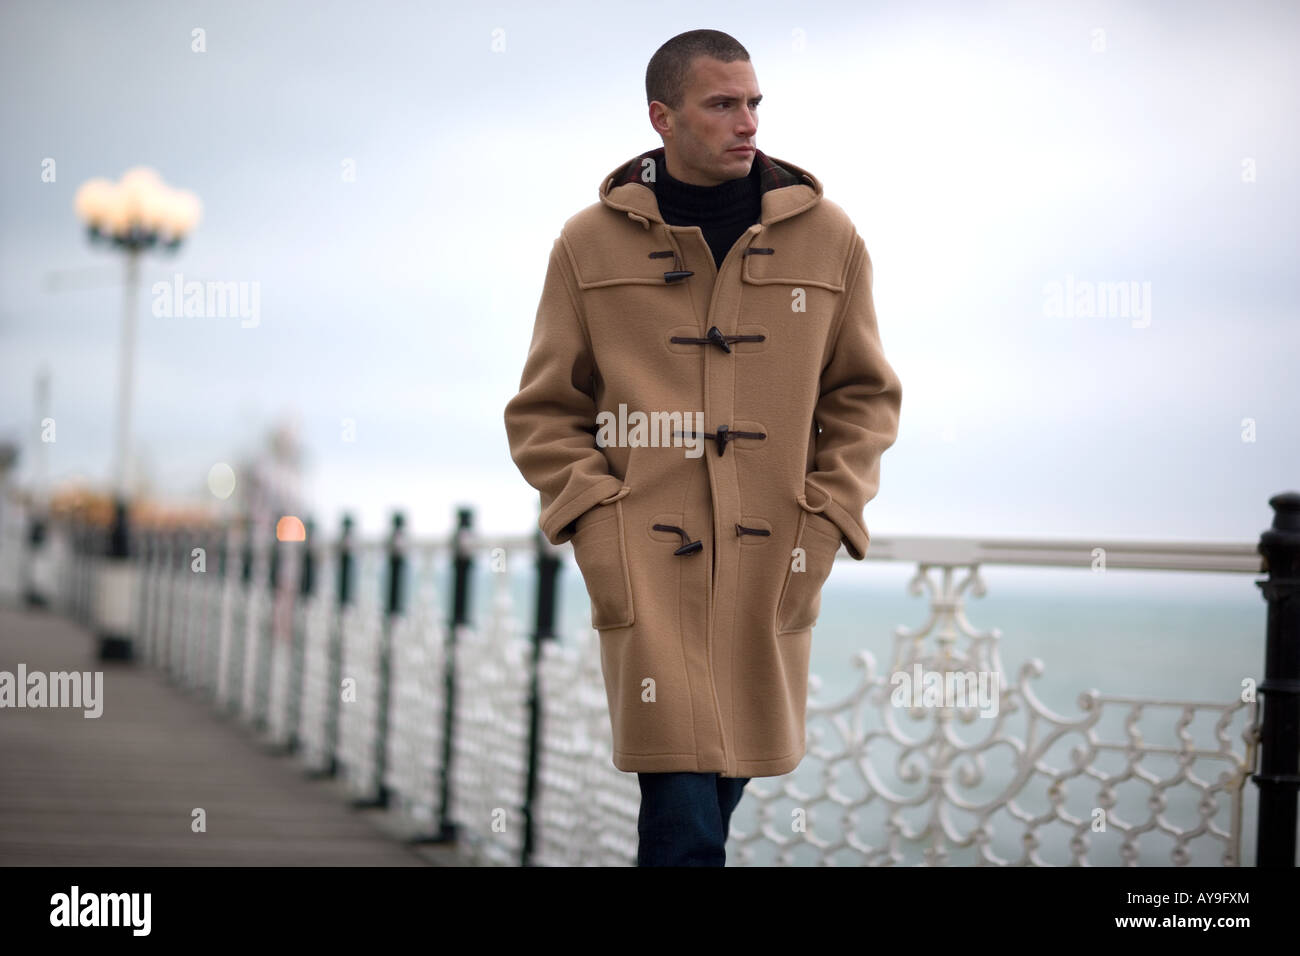 Duffle Coat Men High Resolution Stock Photography and Images - Alamy